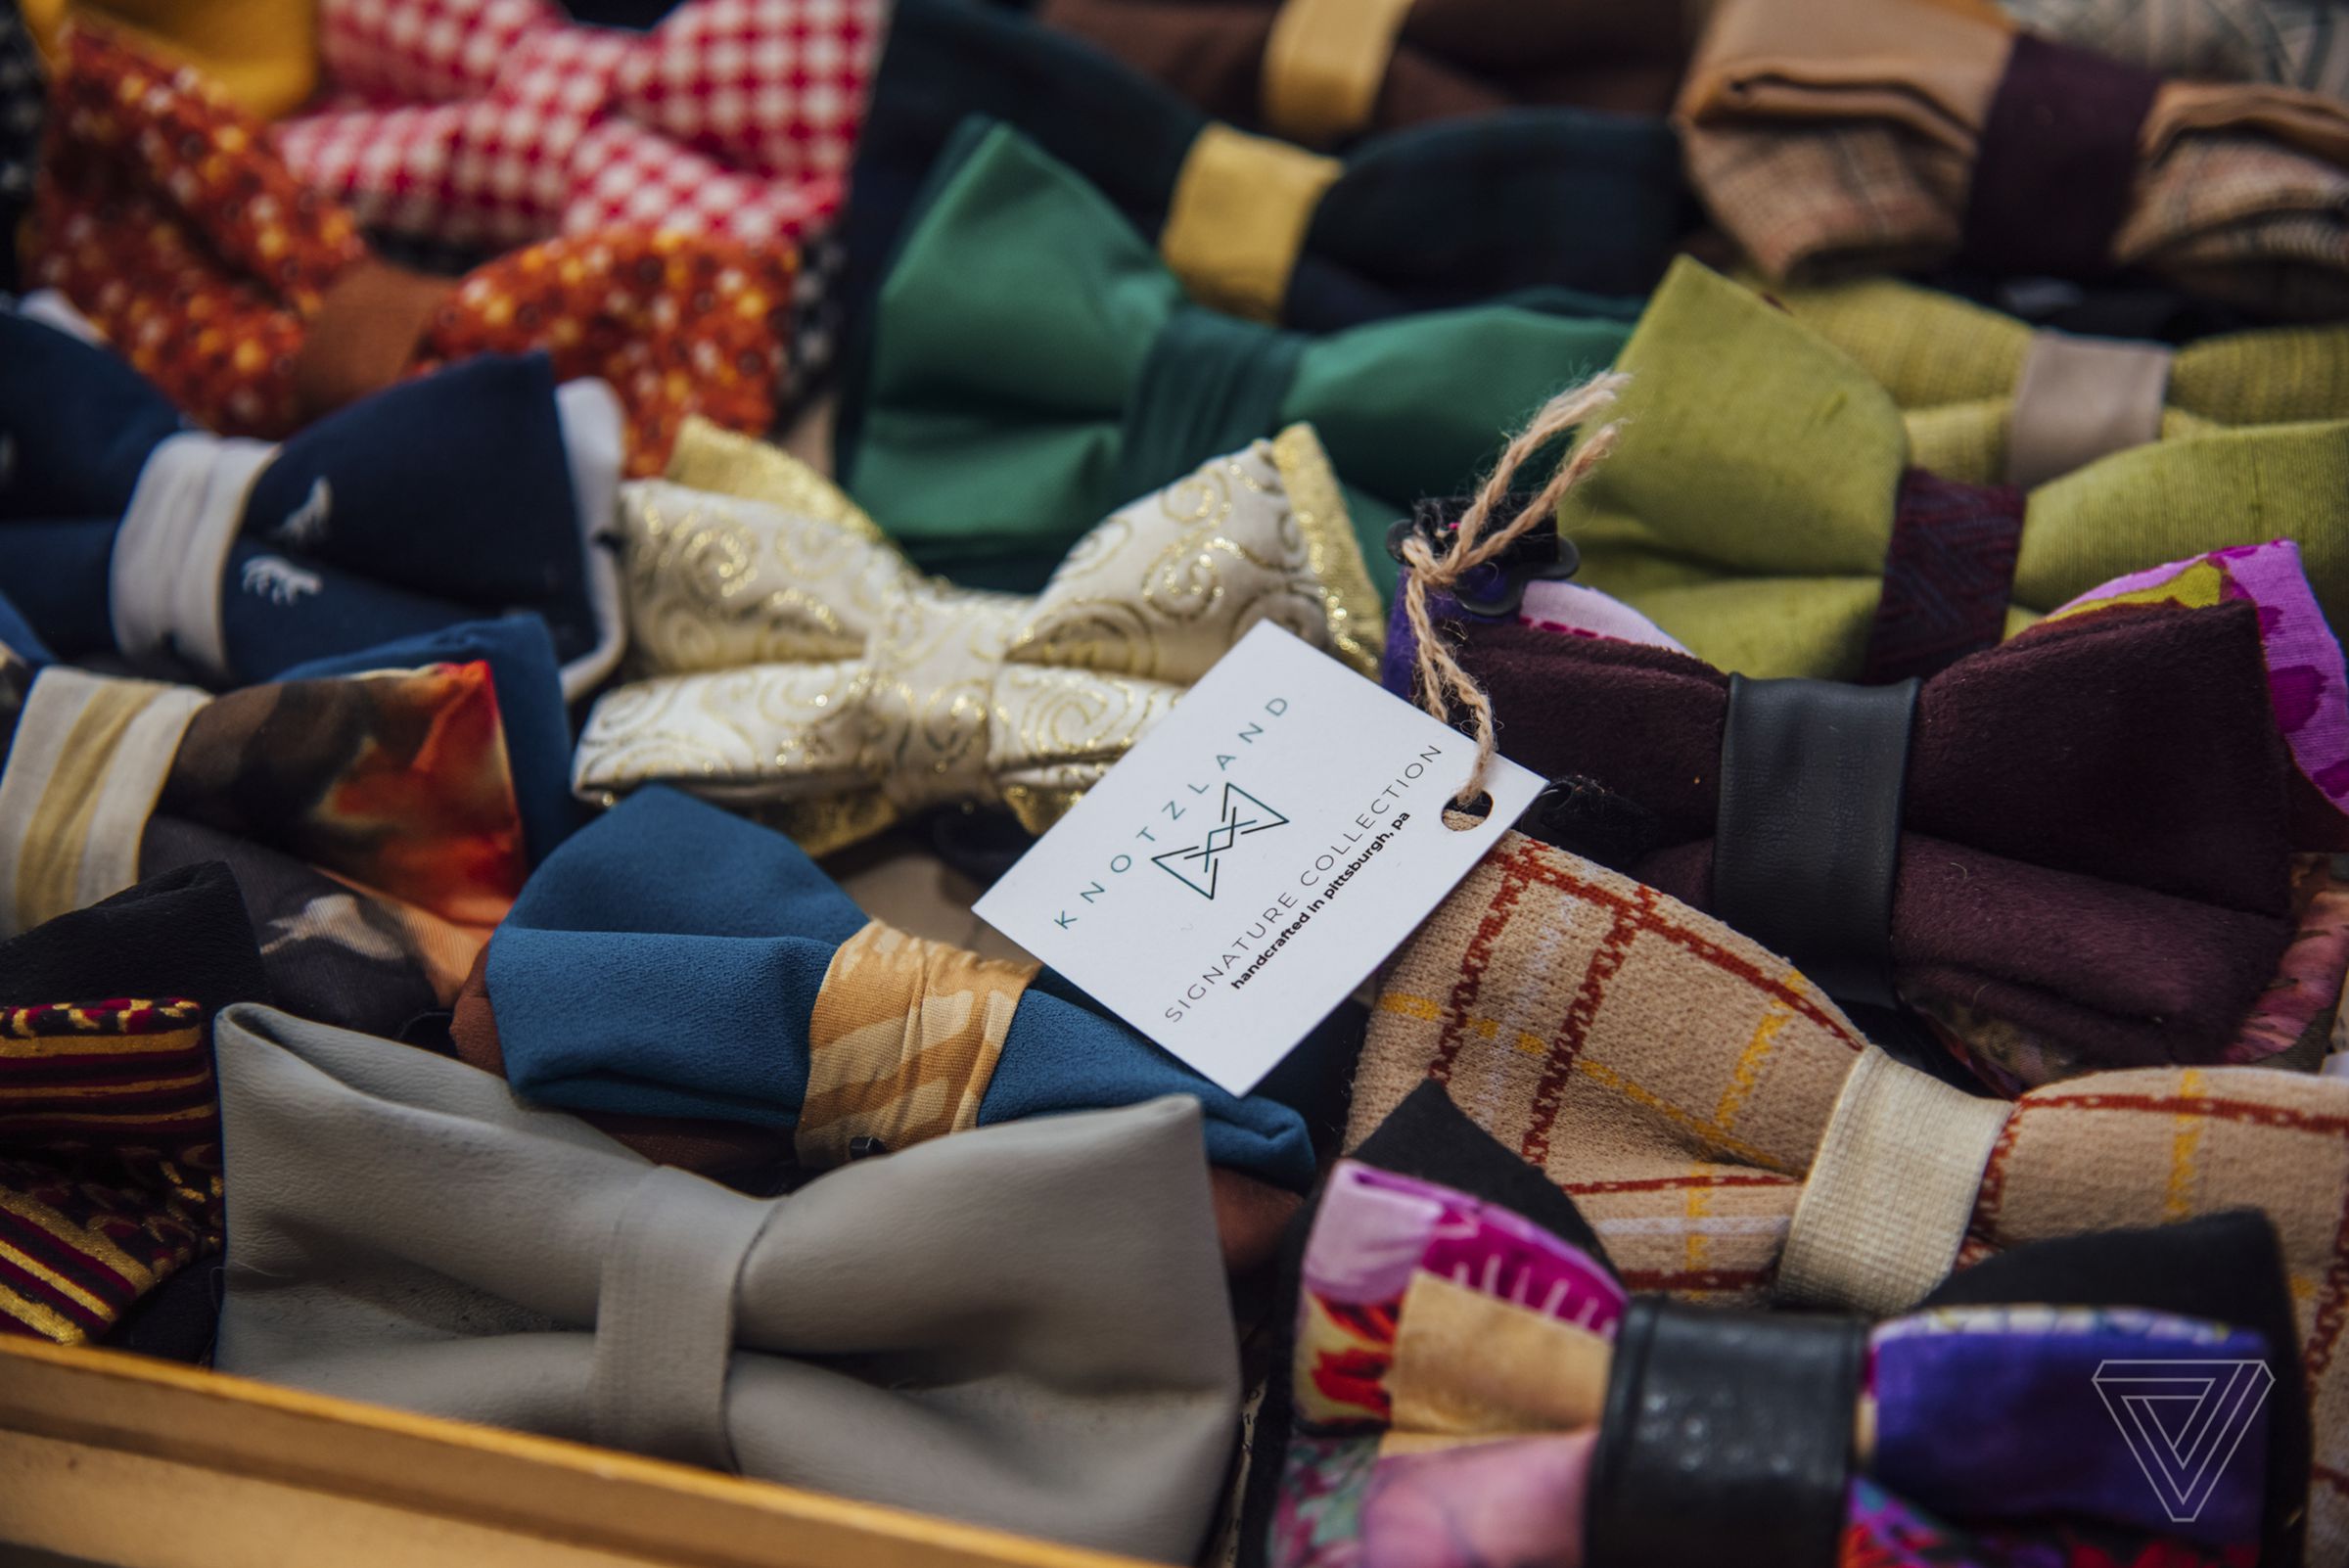 Knotzland bow ties, made from upcycled textile waste, are displayed on a table